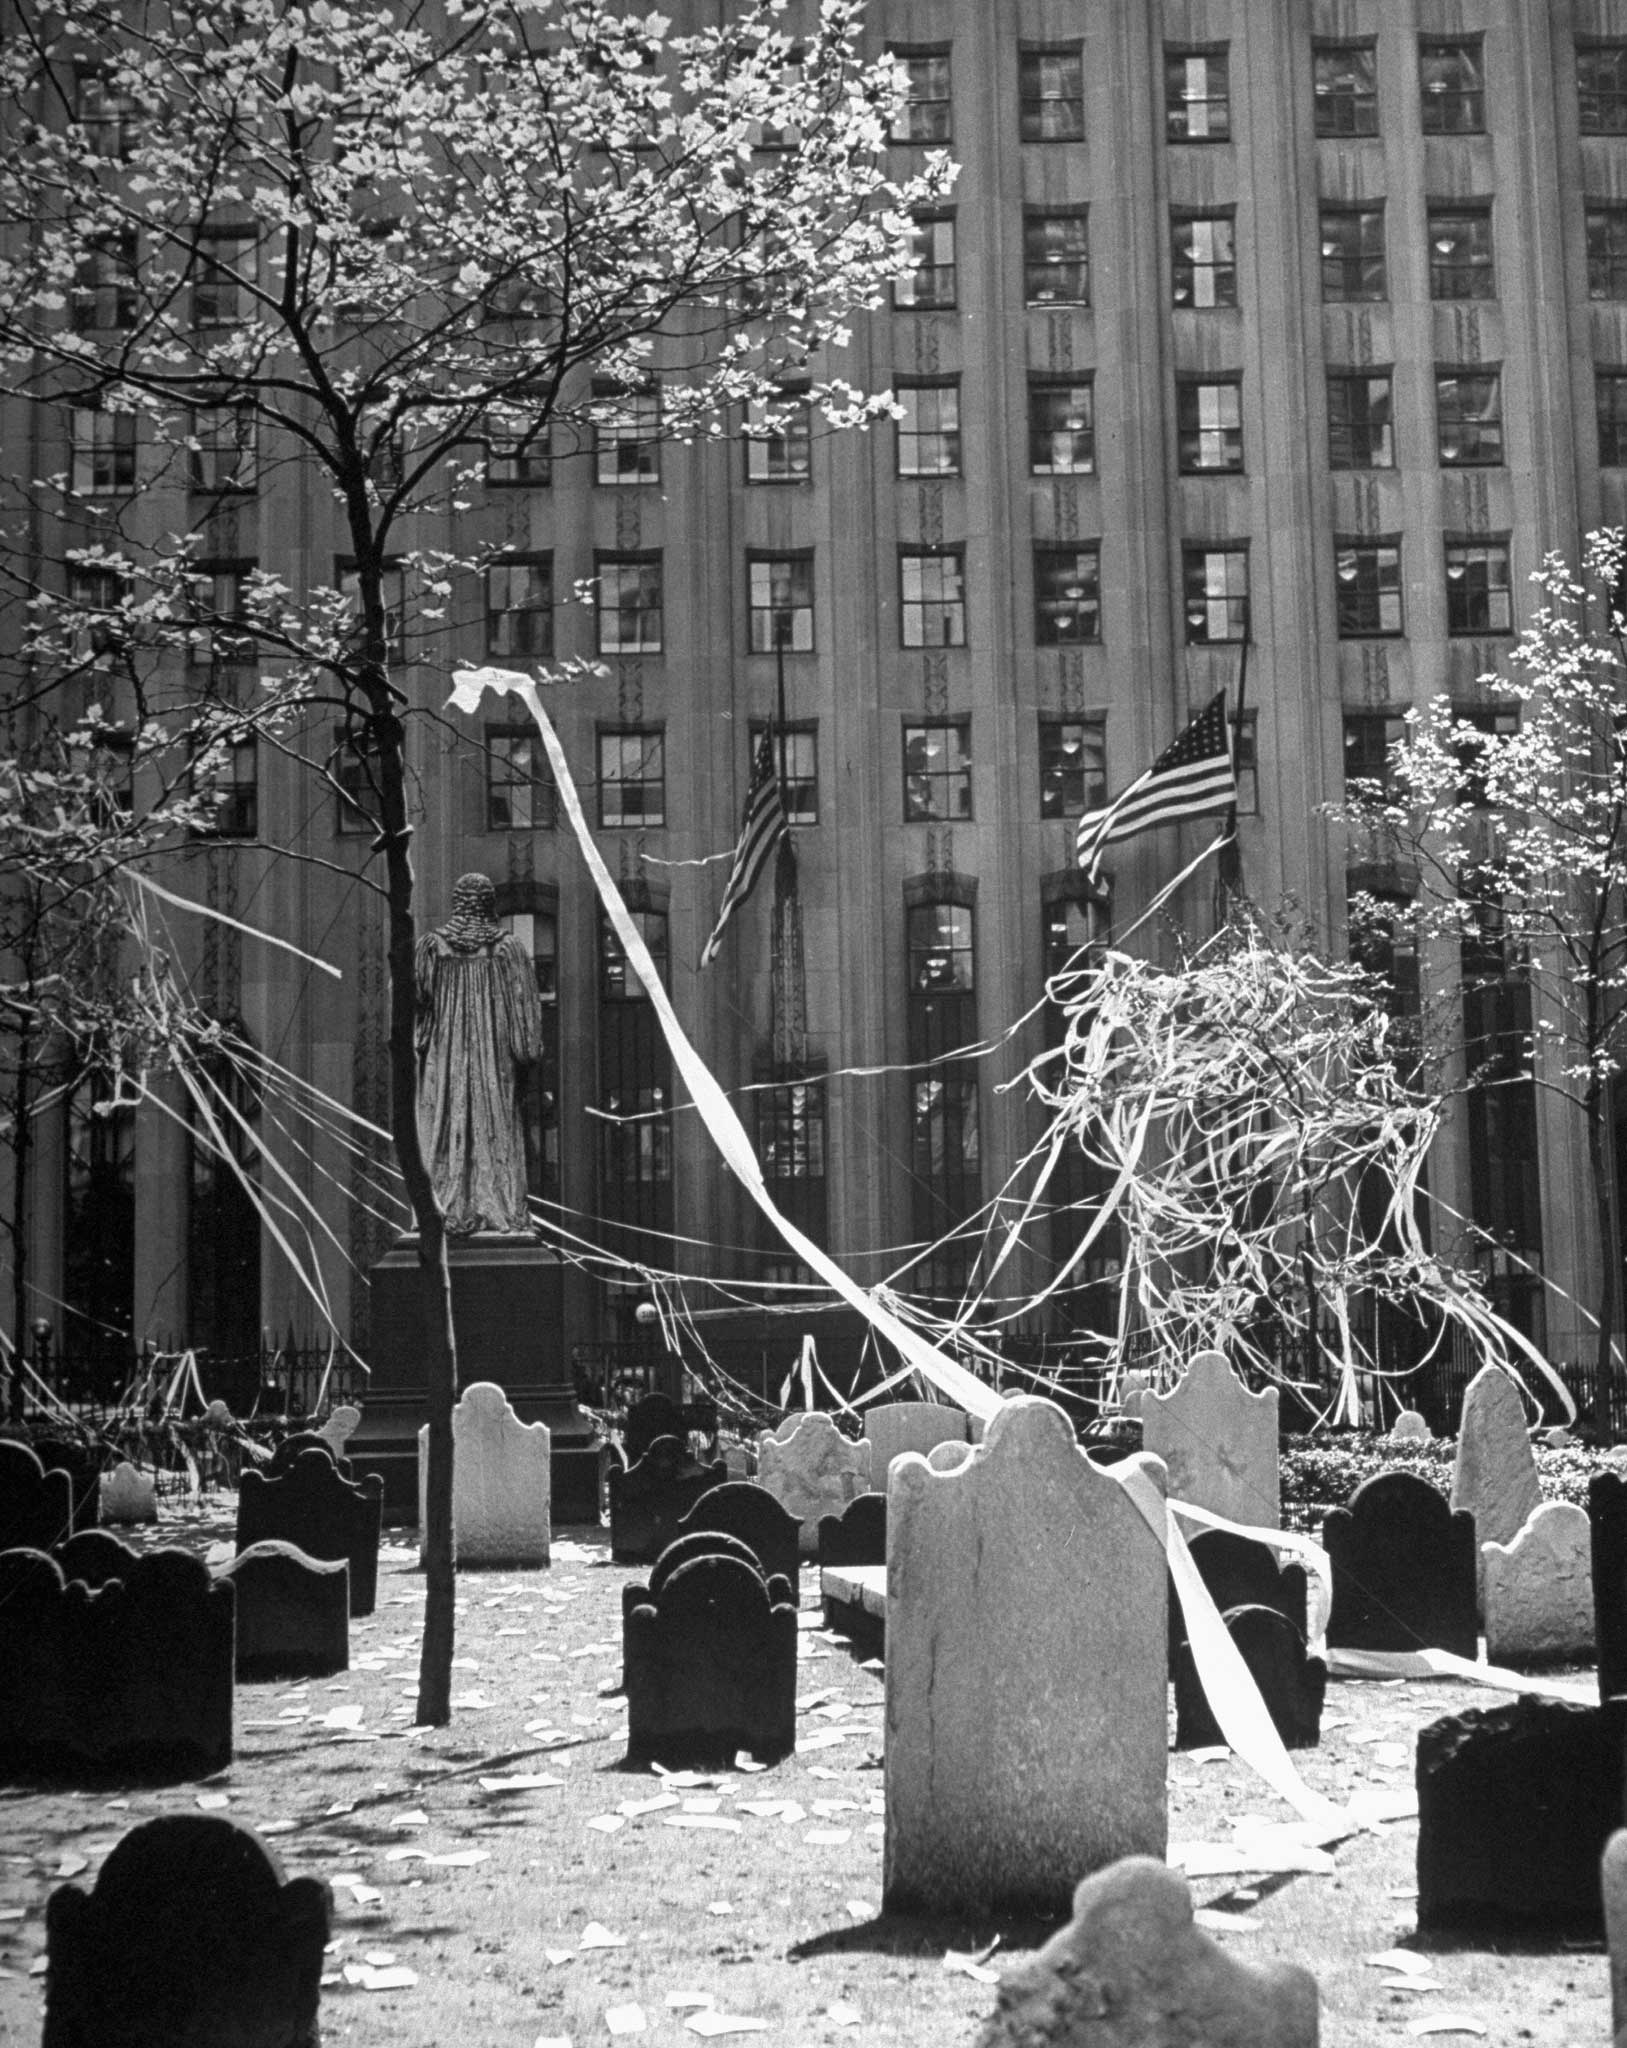 Tangled streamers and confetti thrown by people celebrating the end of the war in Europe litter headstones and the grounds of Trinity Church's venerable cemetery at the foot of Wall Street, 1945.